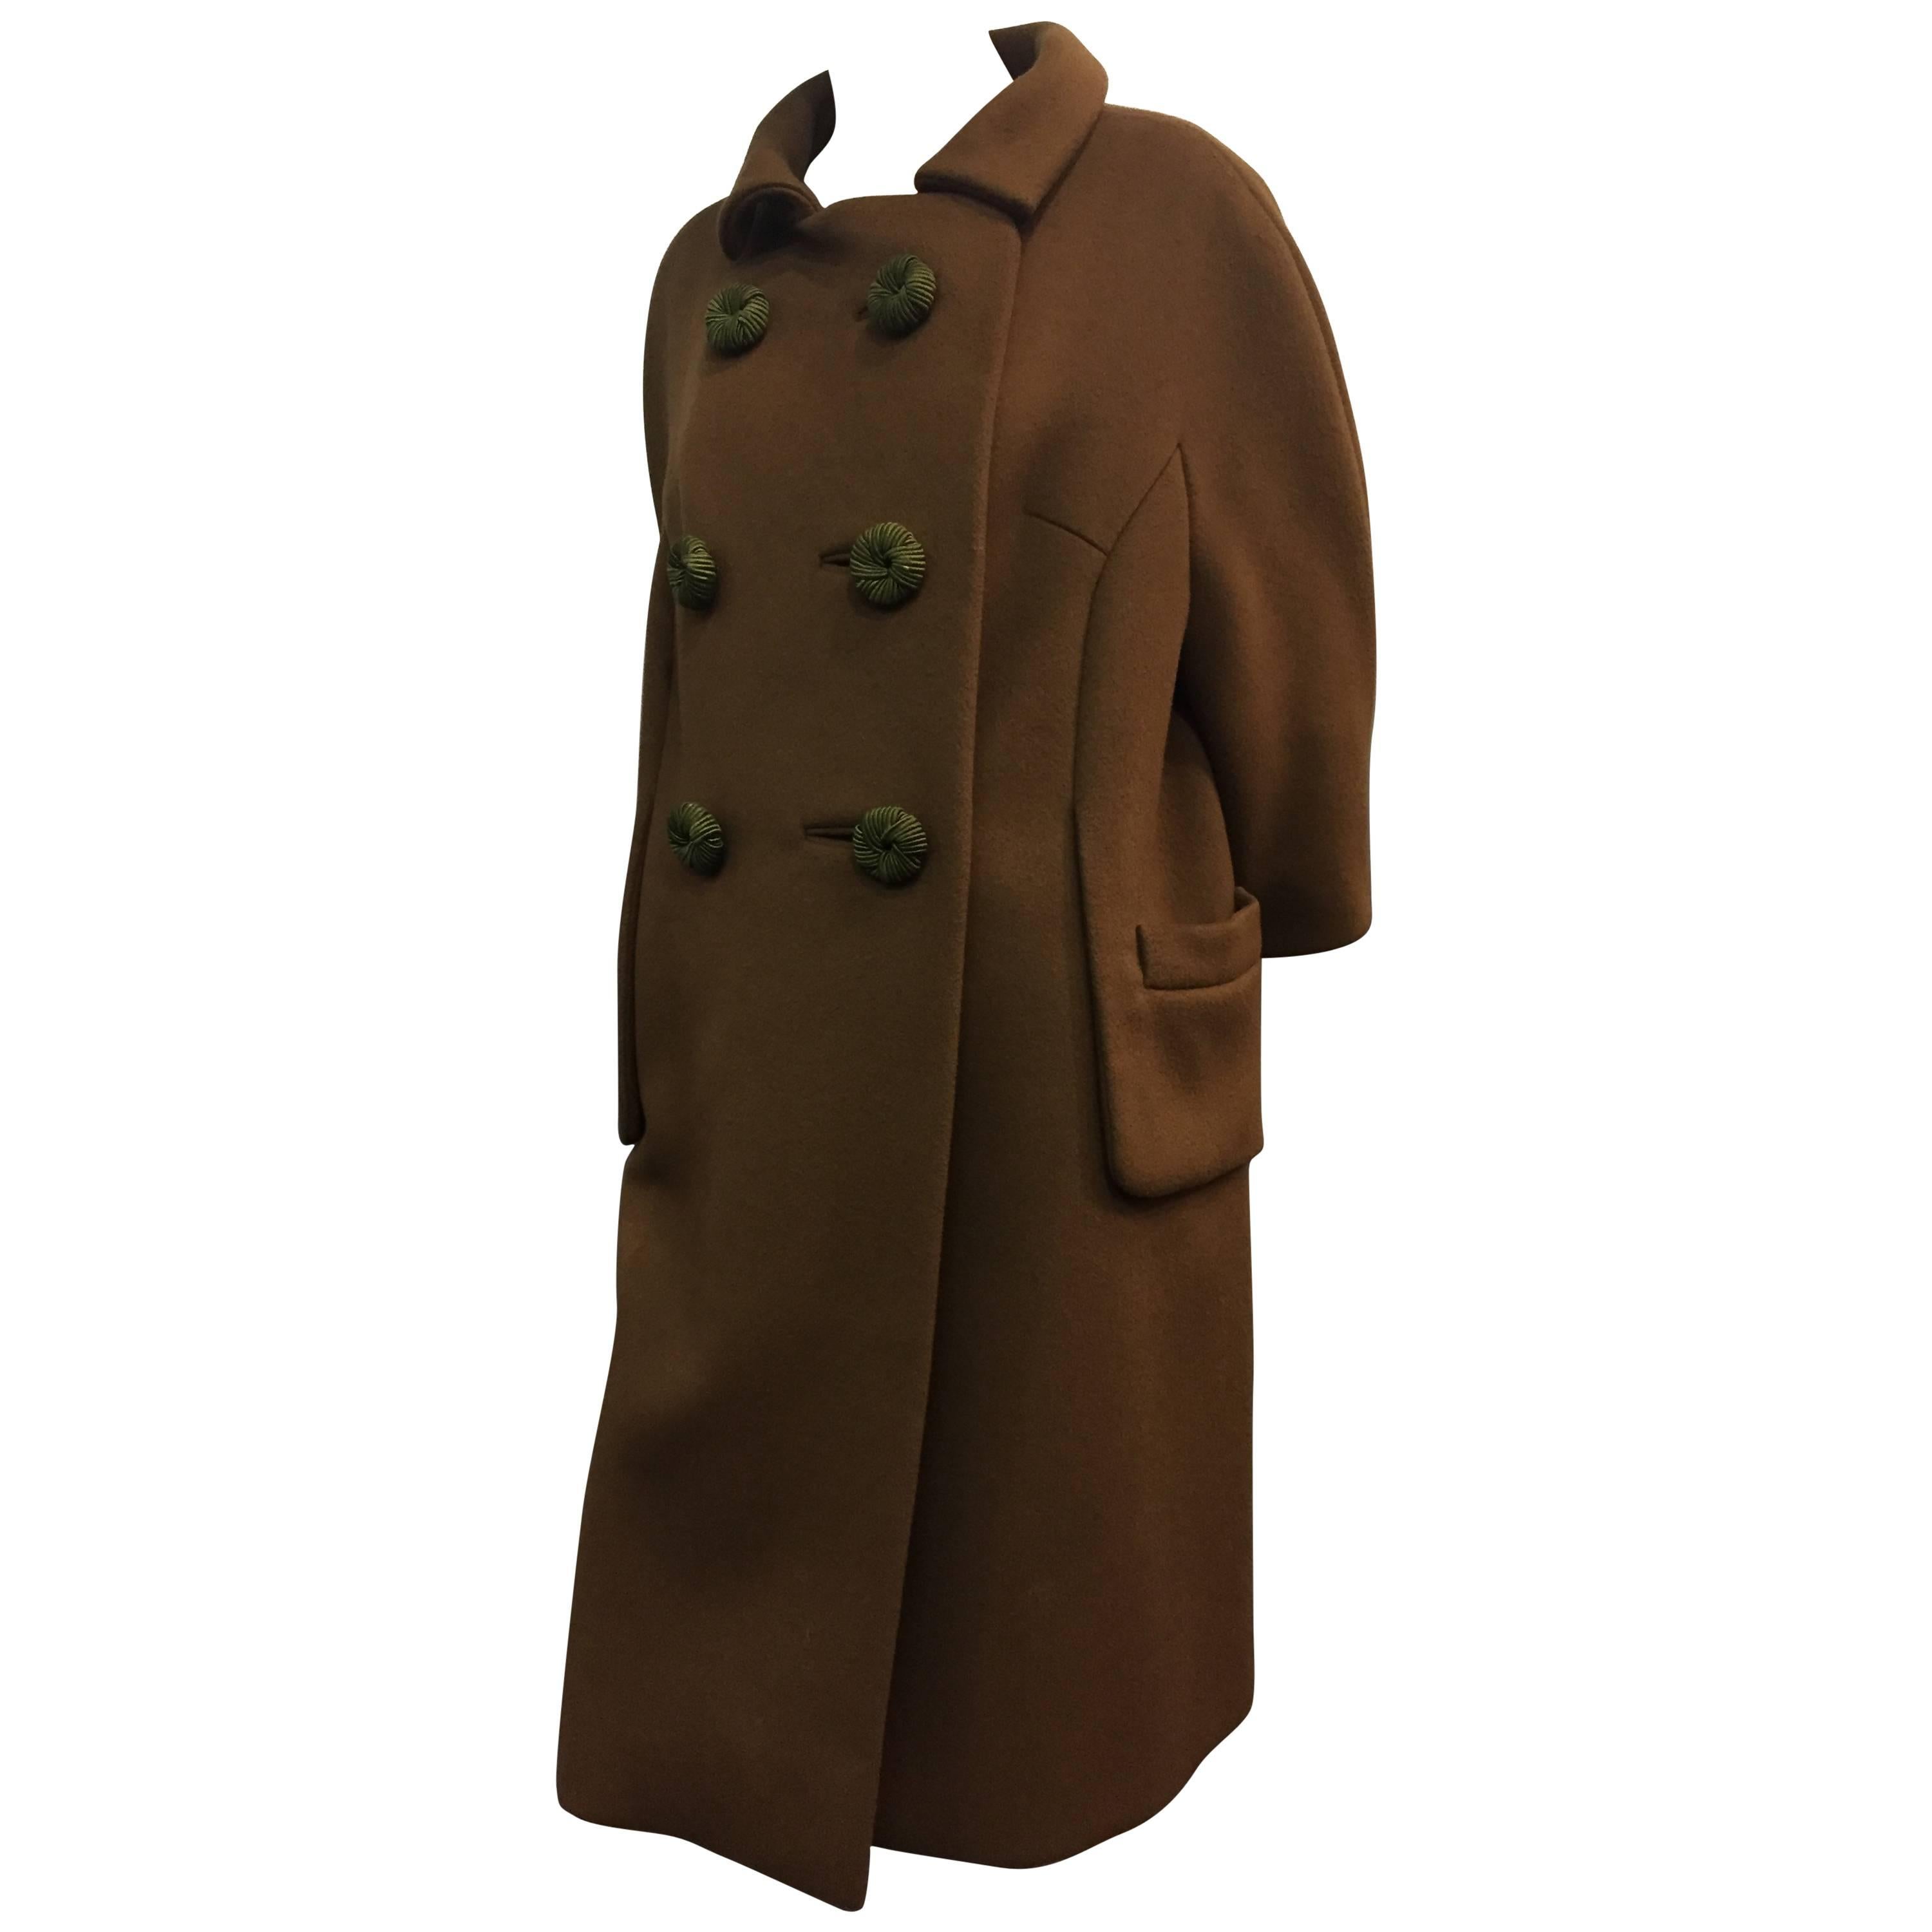 1960's Mod Olive Wool Coat With Braided Buttons